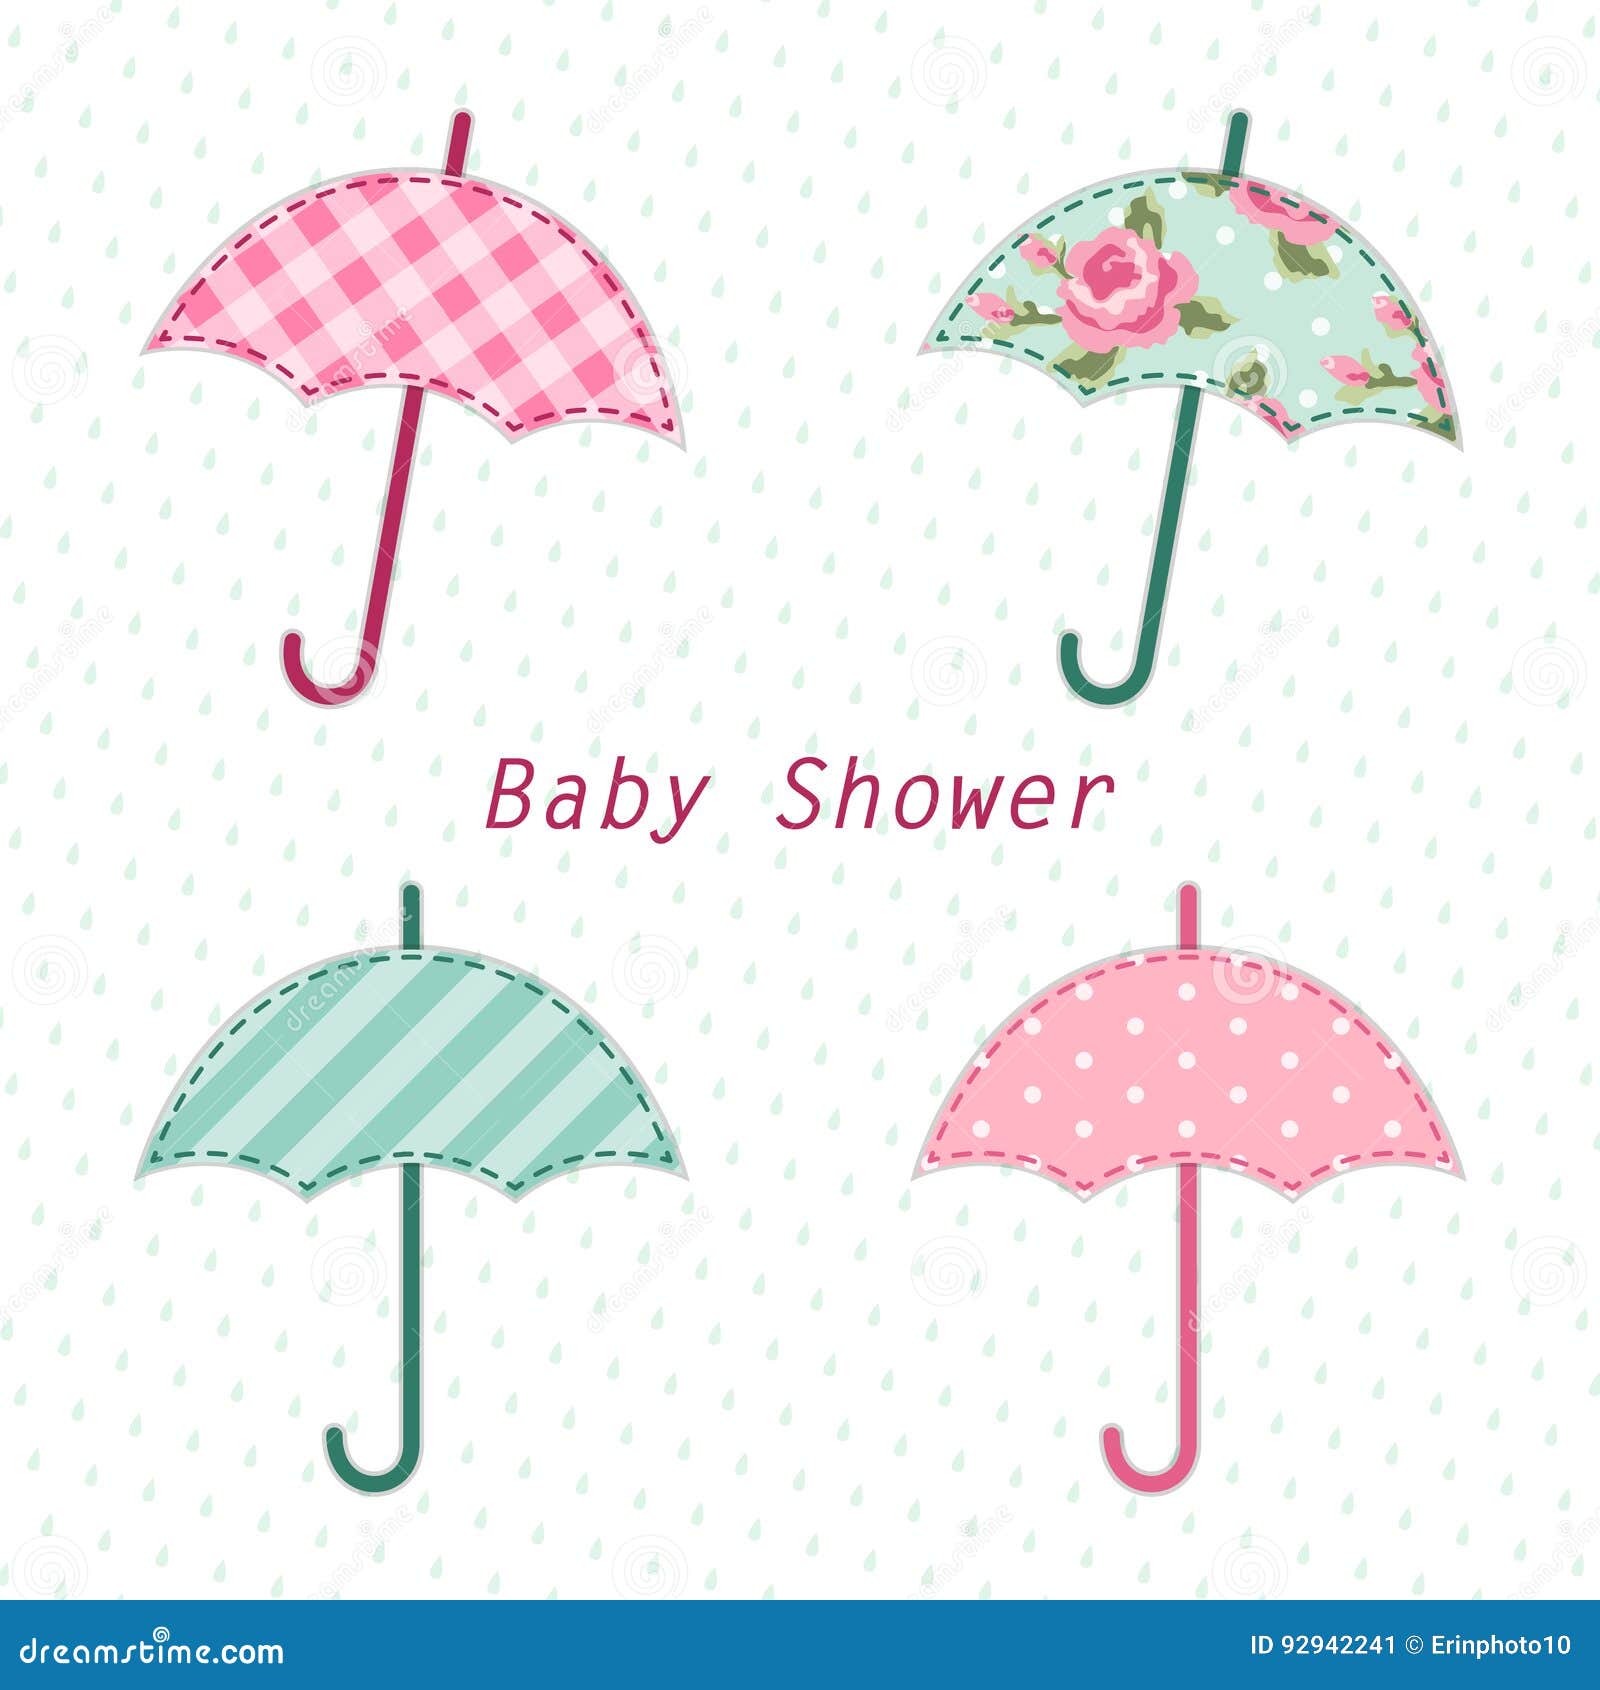 Cute Vintage Baby Shower Card With Umbrella As Fabric Applique Stock